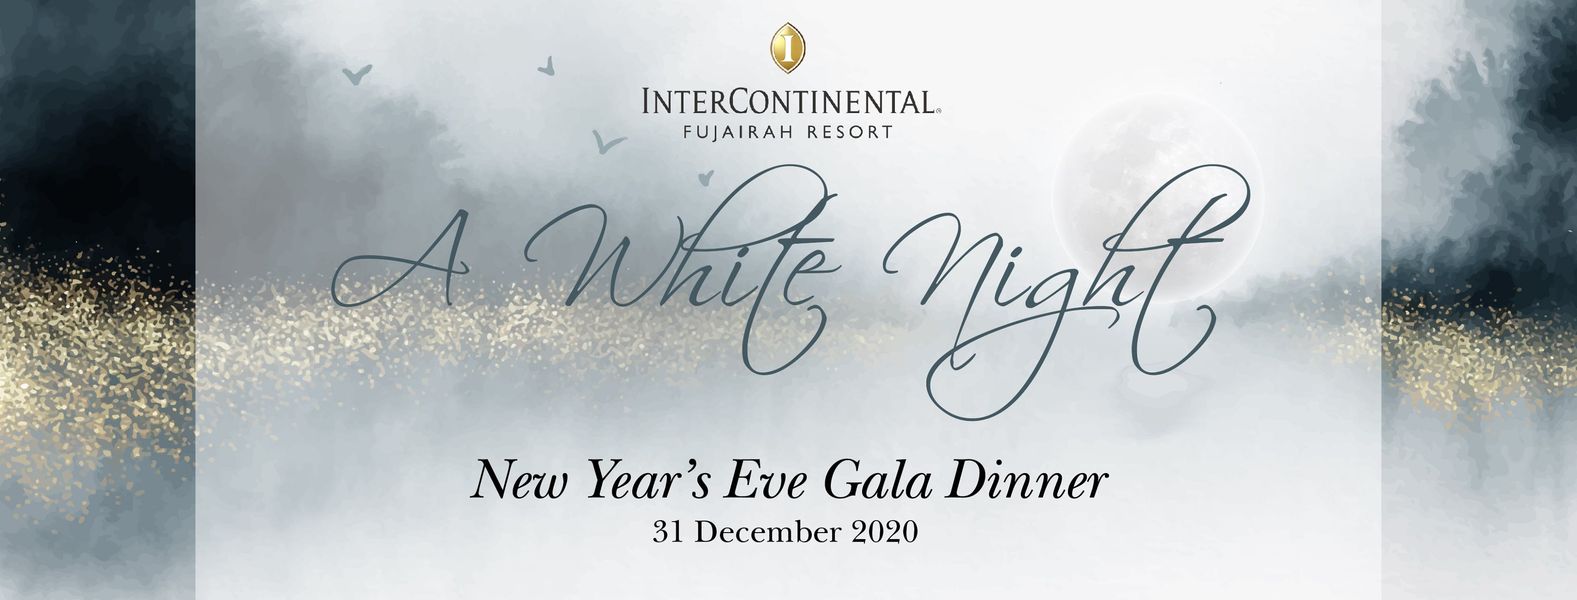 A White Night – New Year’s Eve Gala Dinner - Coming Soon in UAE